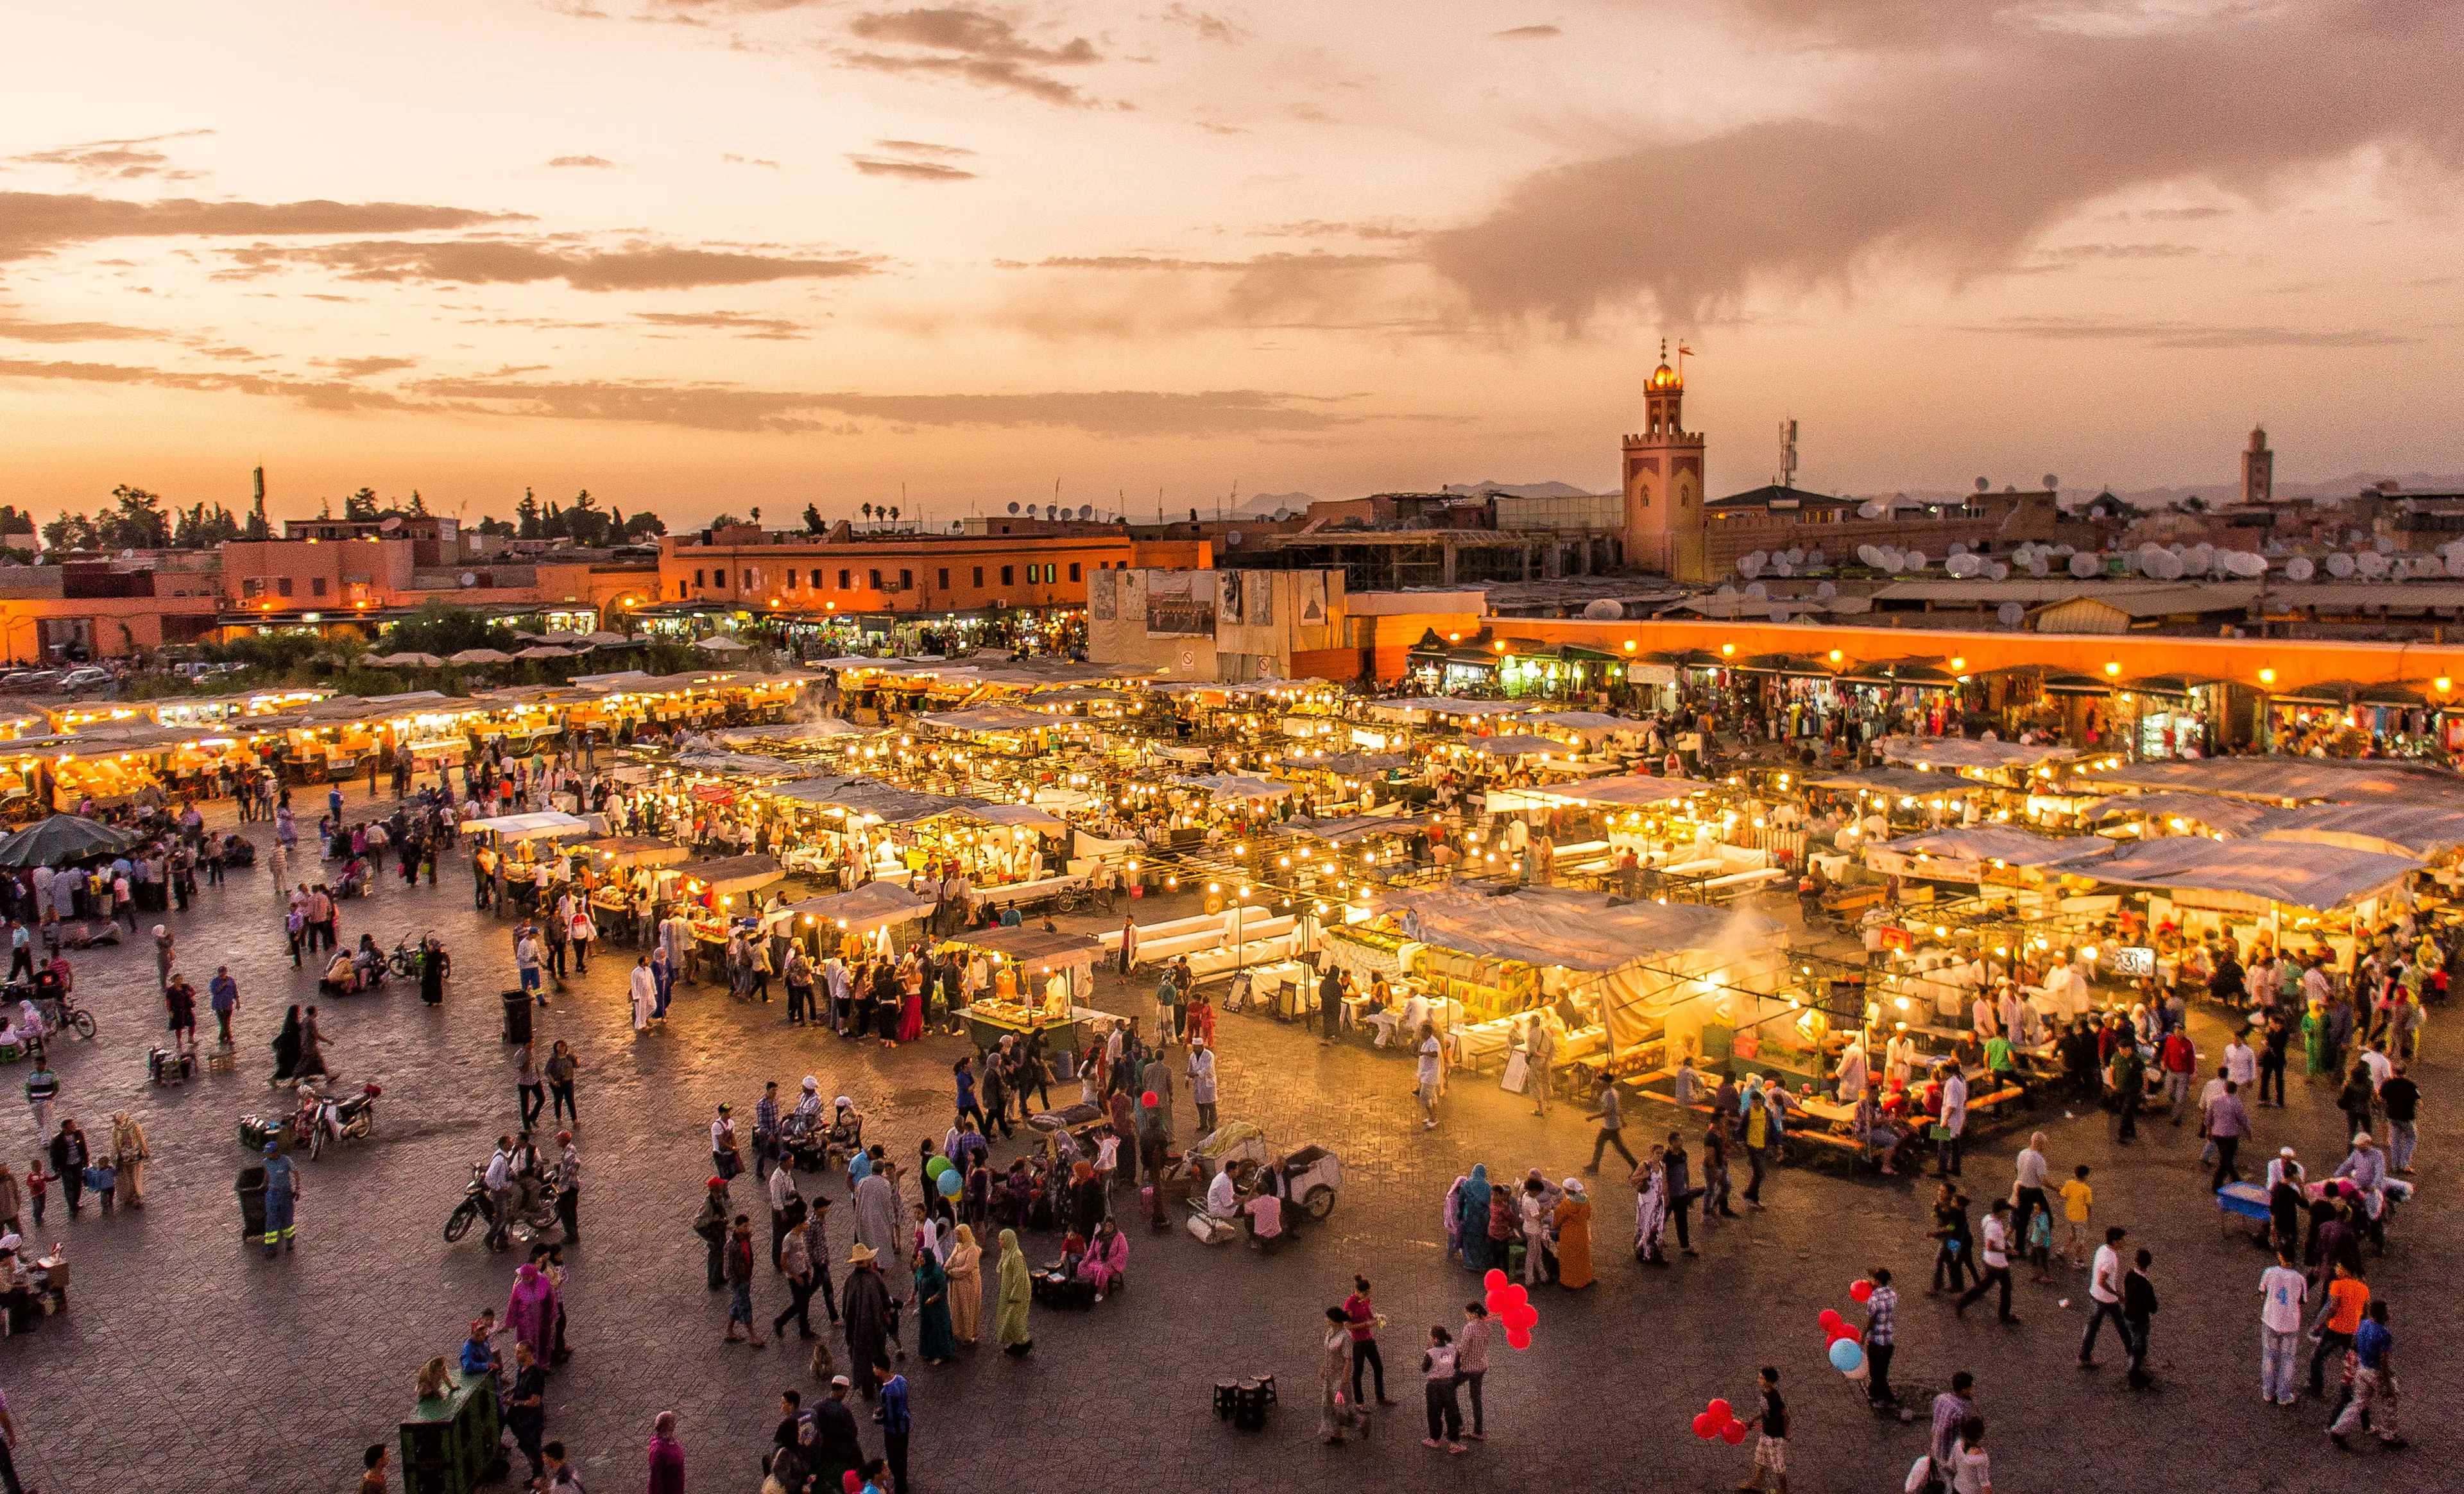 1-Day Solo Local Experience: Sightseeing, Food & Wine in Marrakech